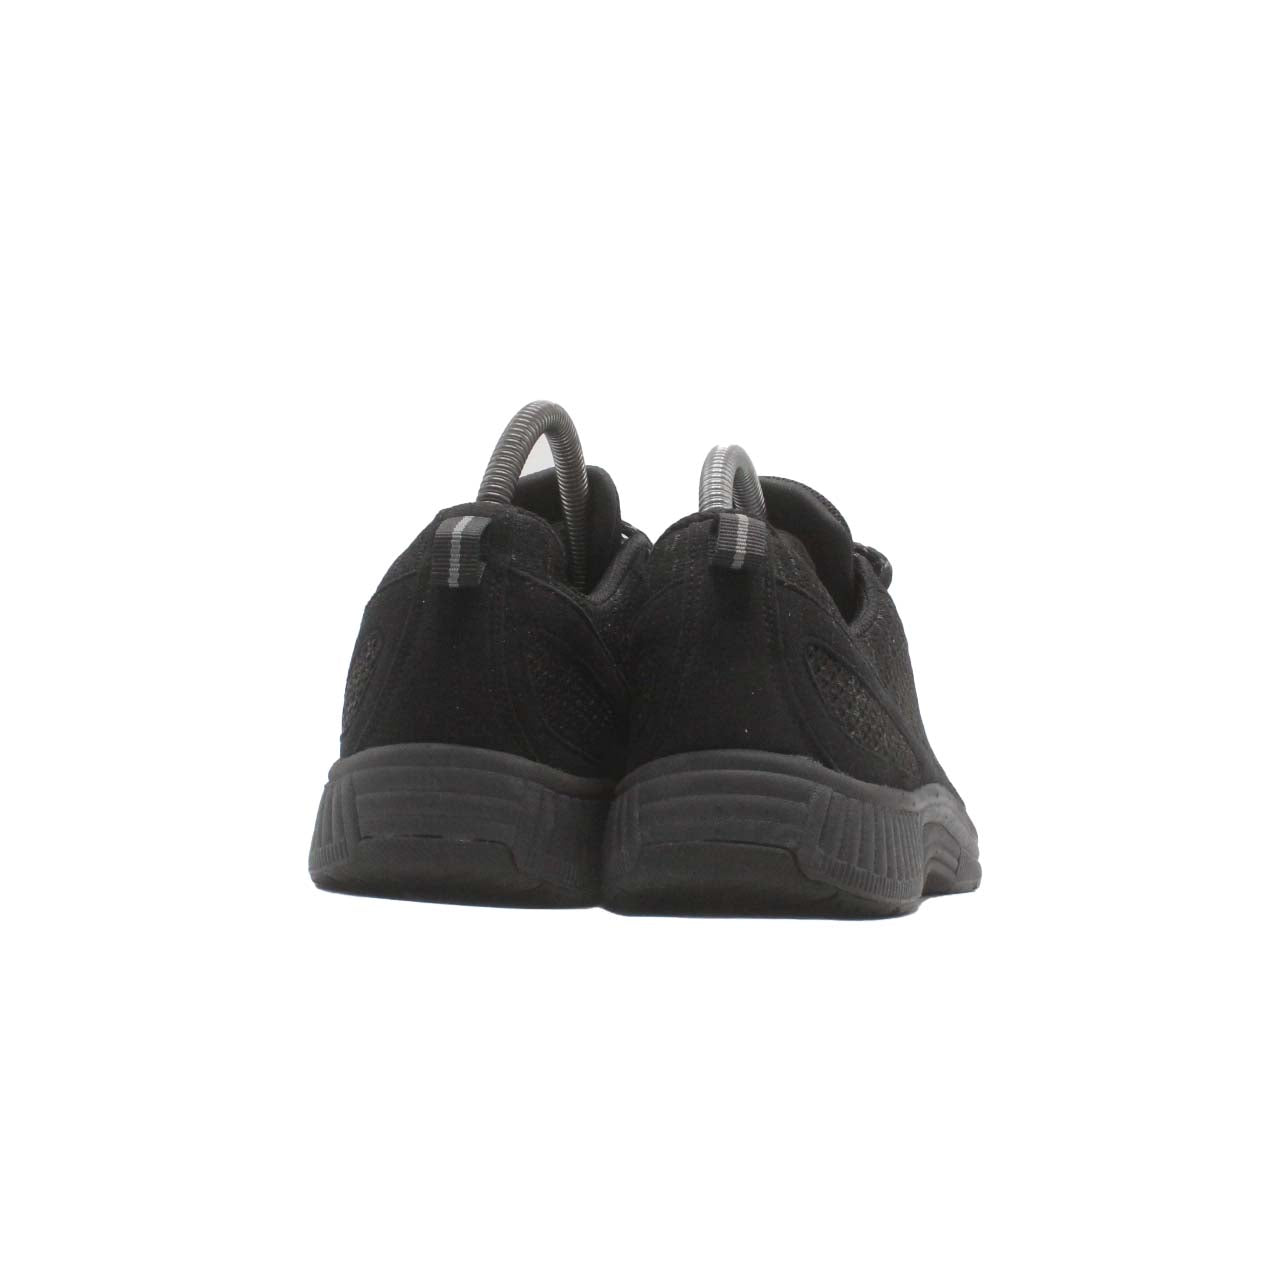 Orthofeet Coral No-Tie Lace Black Walking Shoe